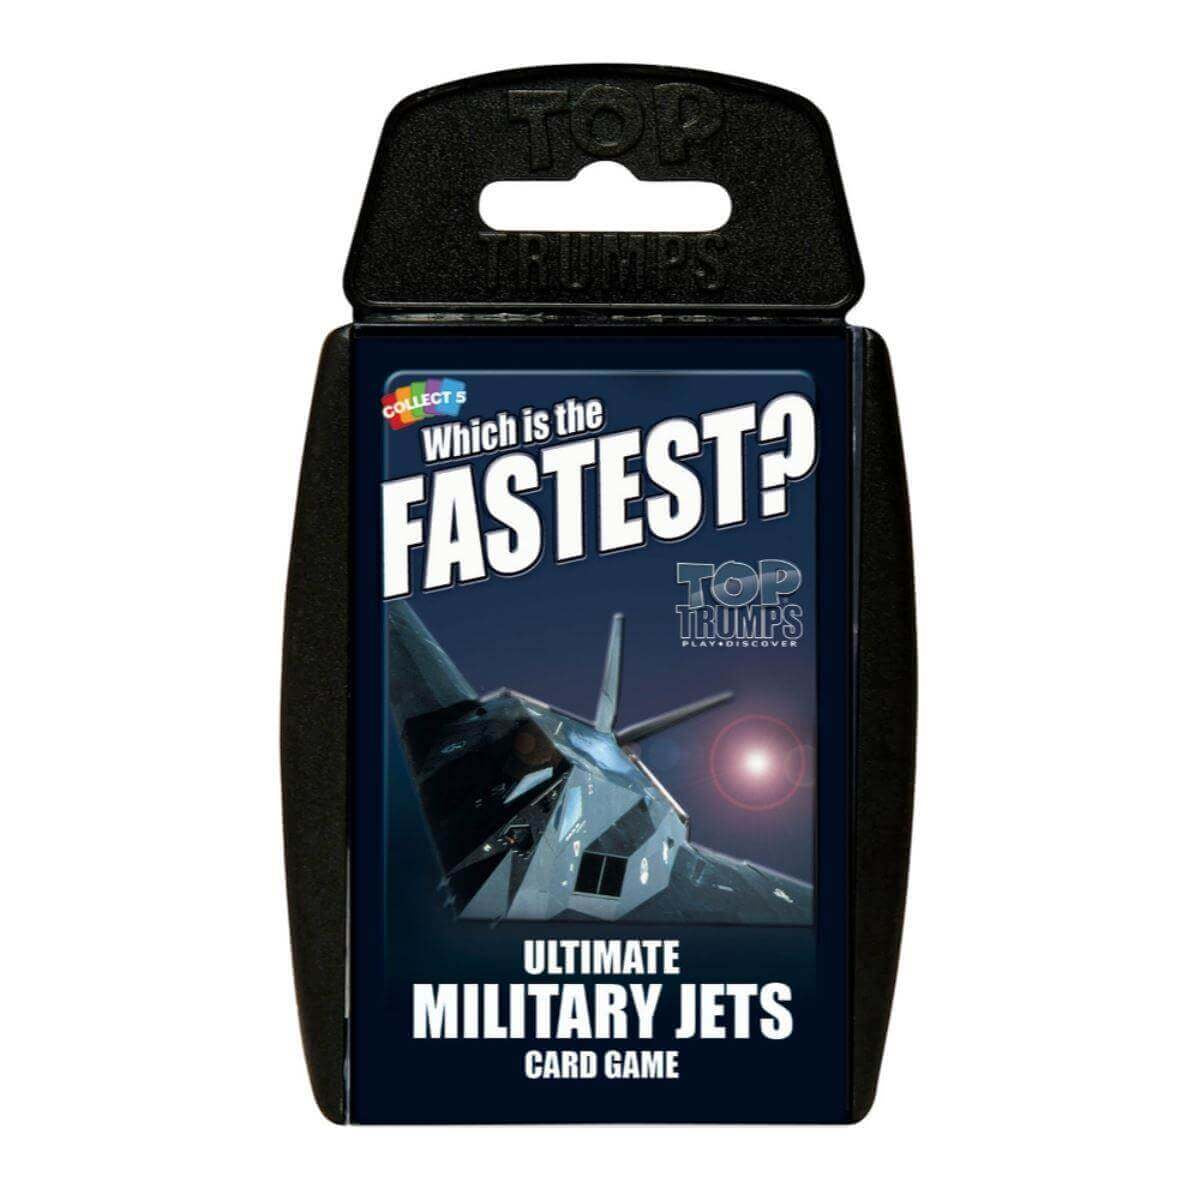 Top Trumps Card Game Ultimate Military Jets